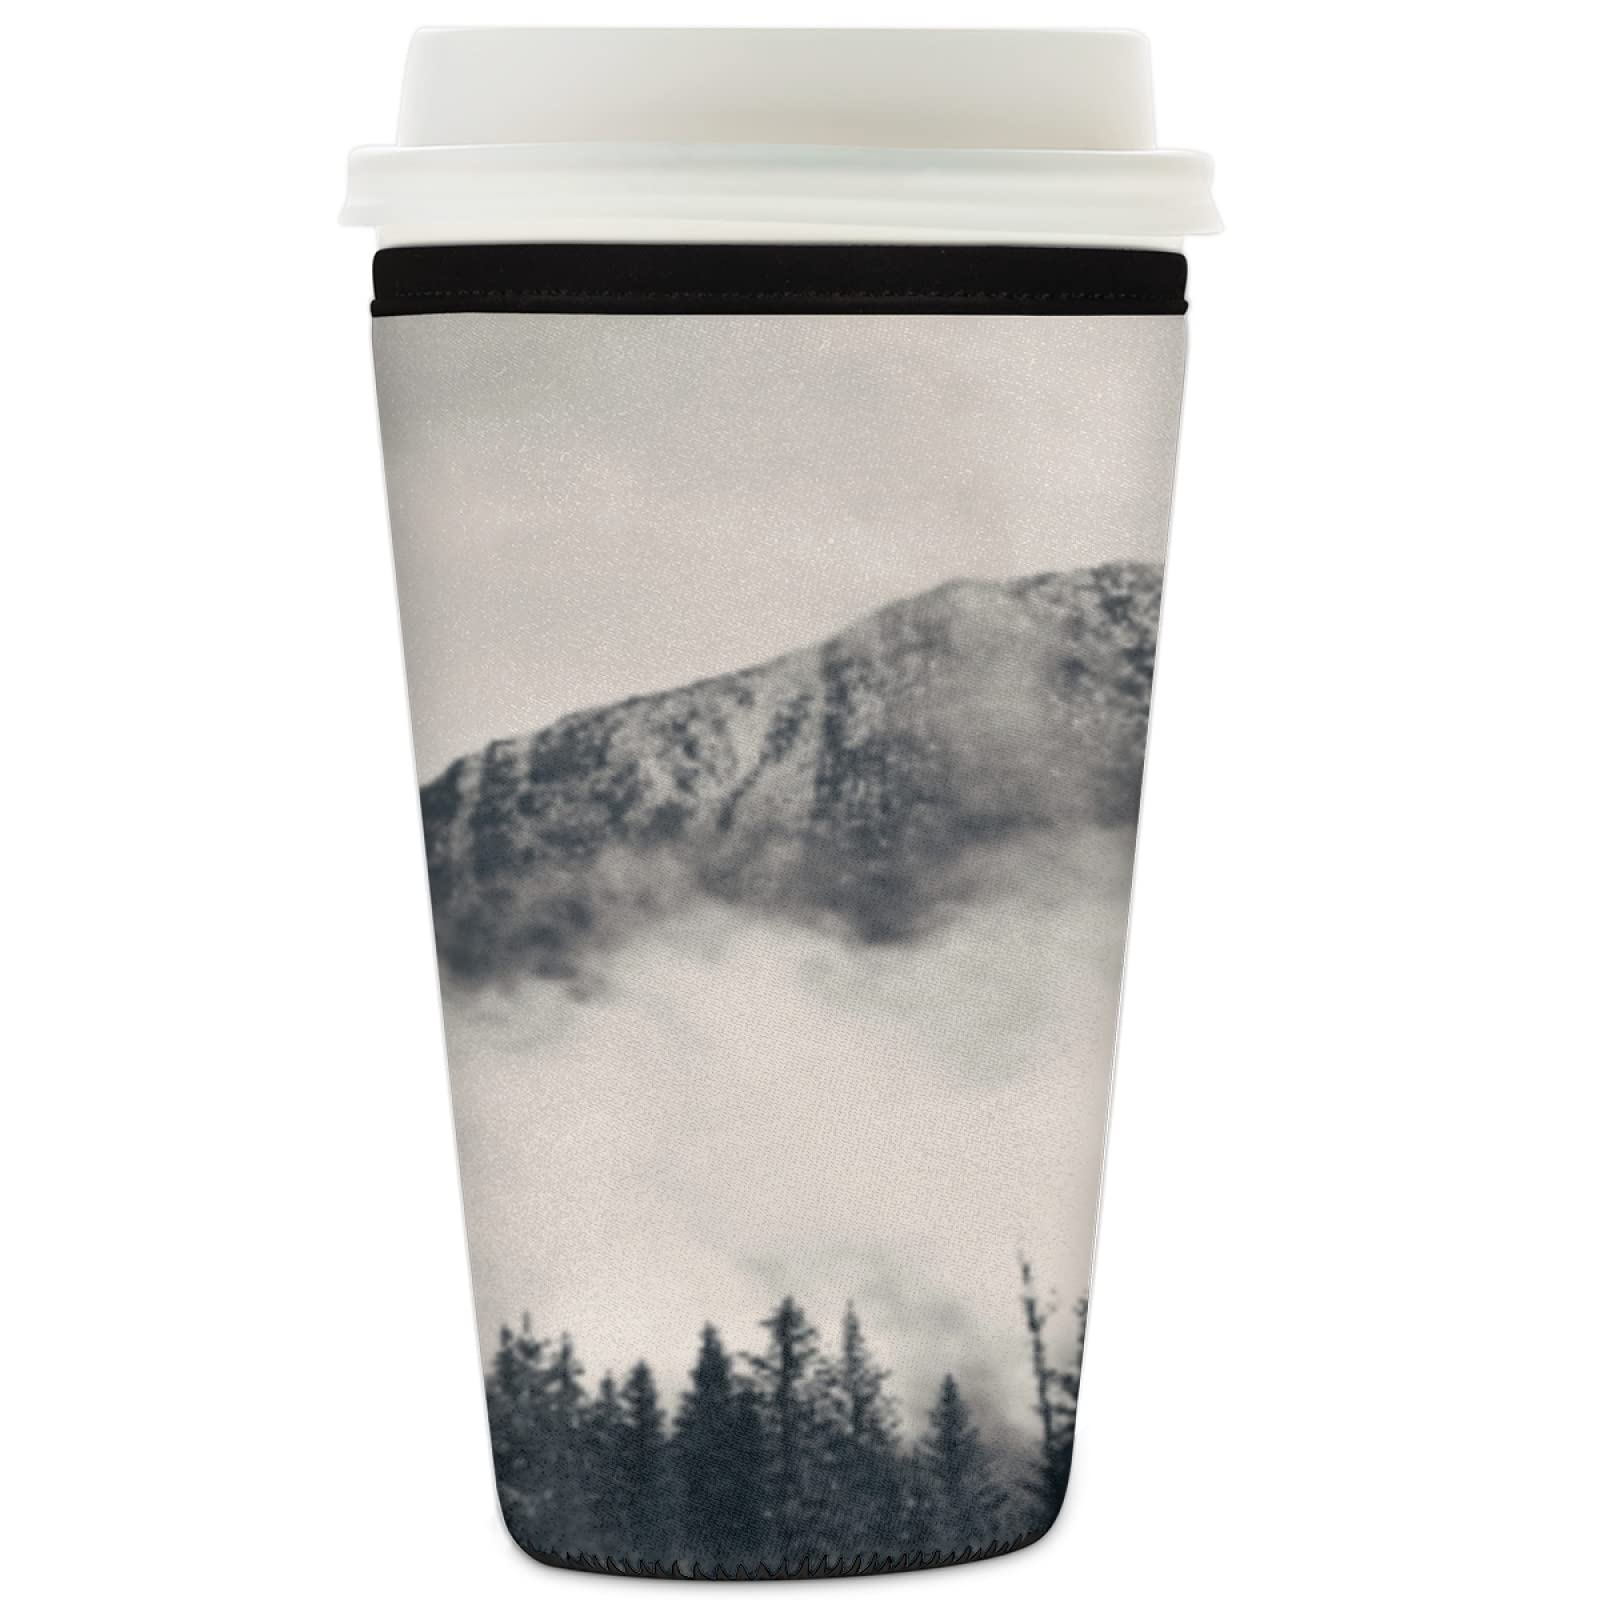 Iced Coffee Sleeve Foggy Mountain, Forest Tree Reusable Neoprene Insulated Sleeves Cup Cover Holder for Cold Drinks Beverages 22oz - 24oz